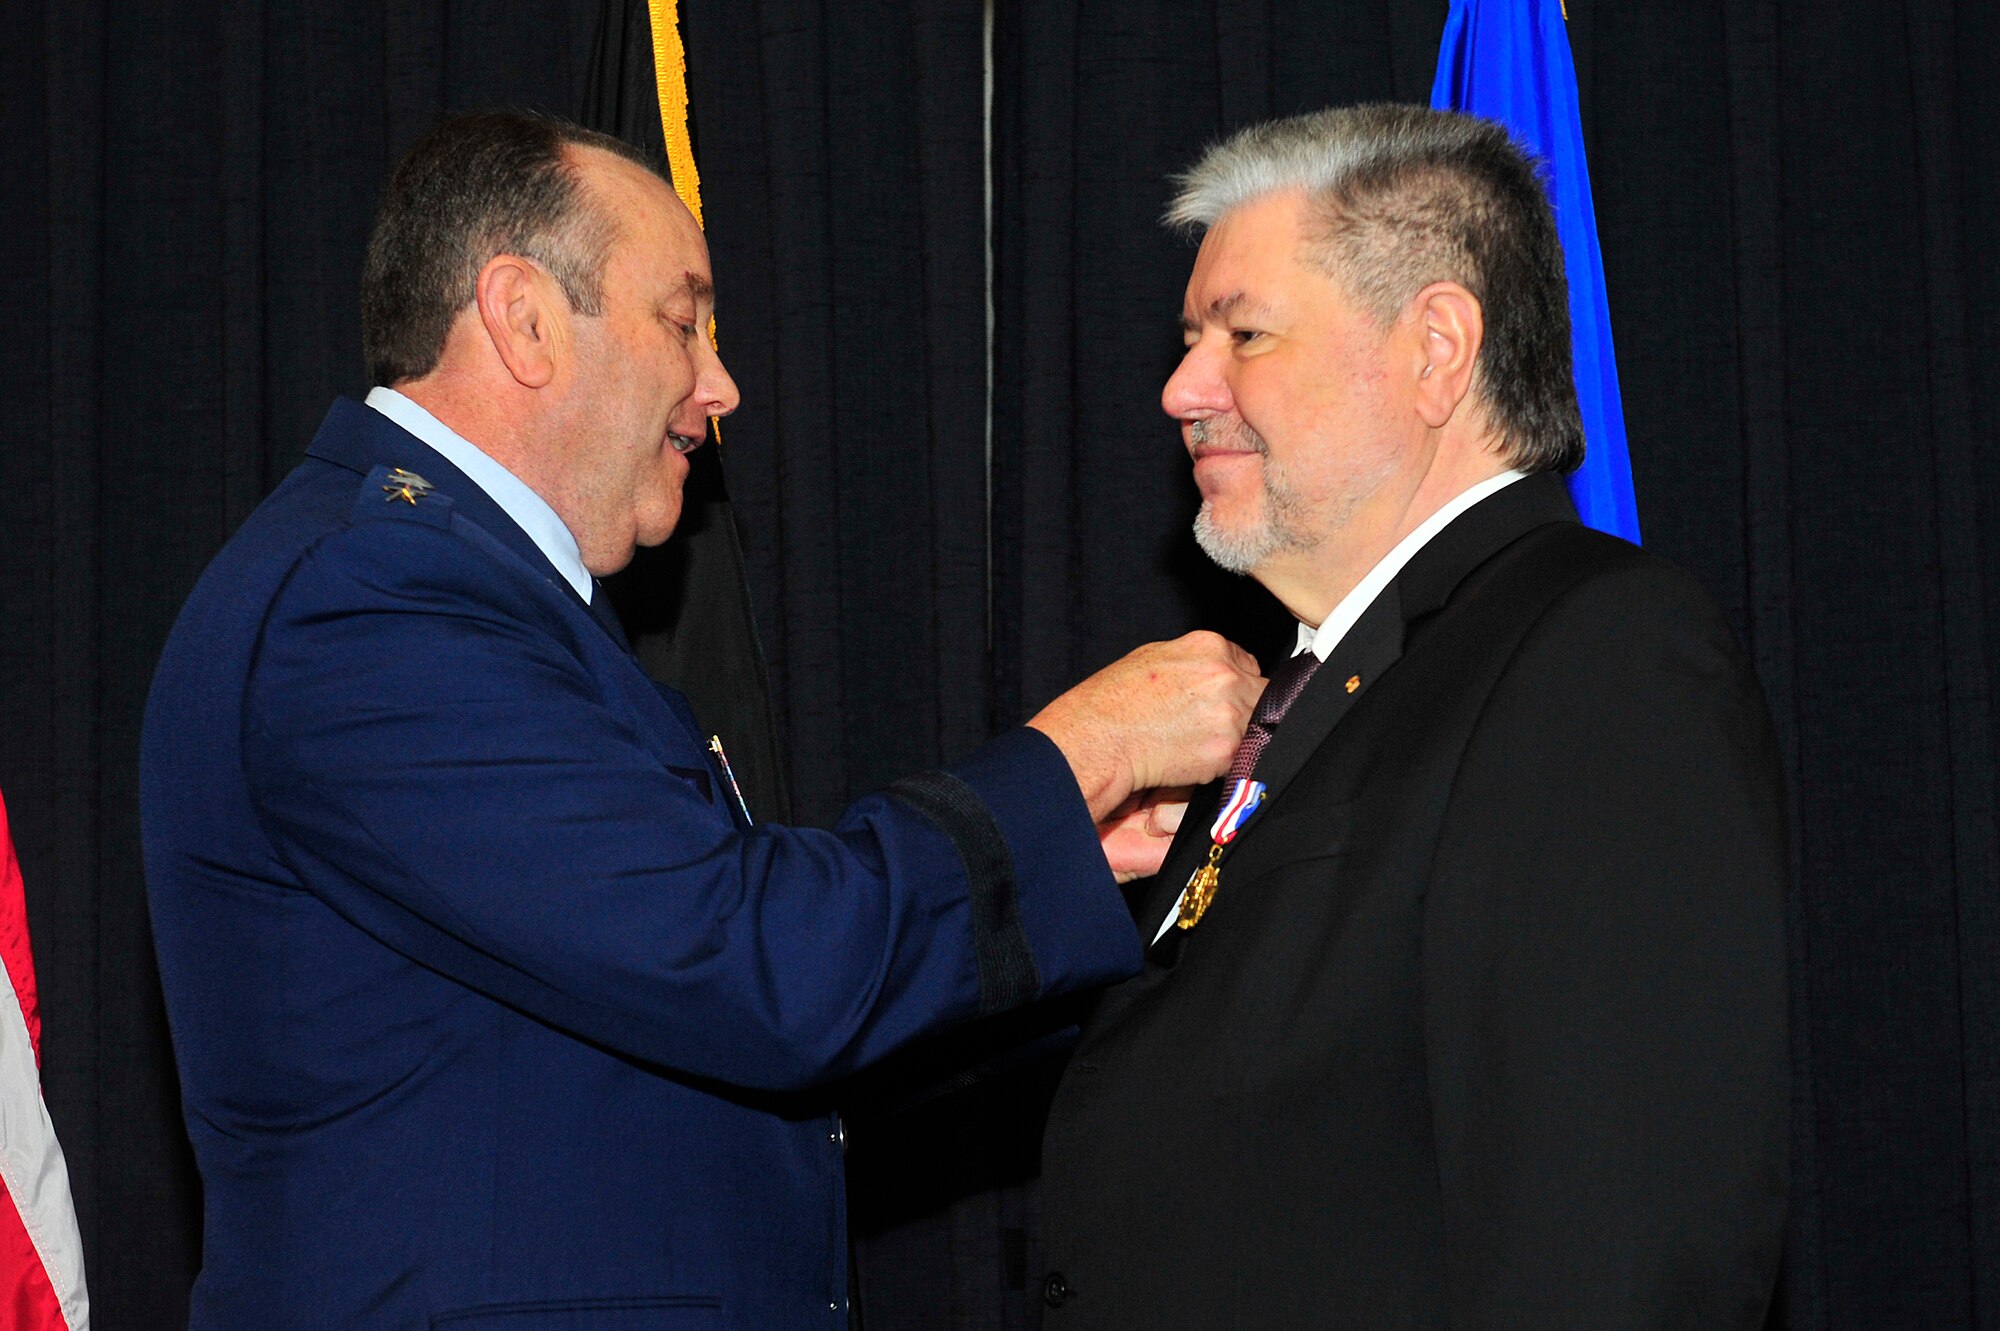 Gen. Philip M. Breedlove, United States Air Forces in Europe and Air Forces Africa commander, presents former Minister President Kurt Beck the U.S. Air Forces in Europe Medal of Distinction on Ramstein Air Base, Germany, March 8, 2013.  The USAFE Medal of Distinction is awarded to non-U.S. citizens in recognition of extraordinary service, achievements, or support to the accomplishment of the mission of USAFE. (U.S. Air Force photo/Senior Airman Aaron-Forrest Wainwright)